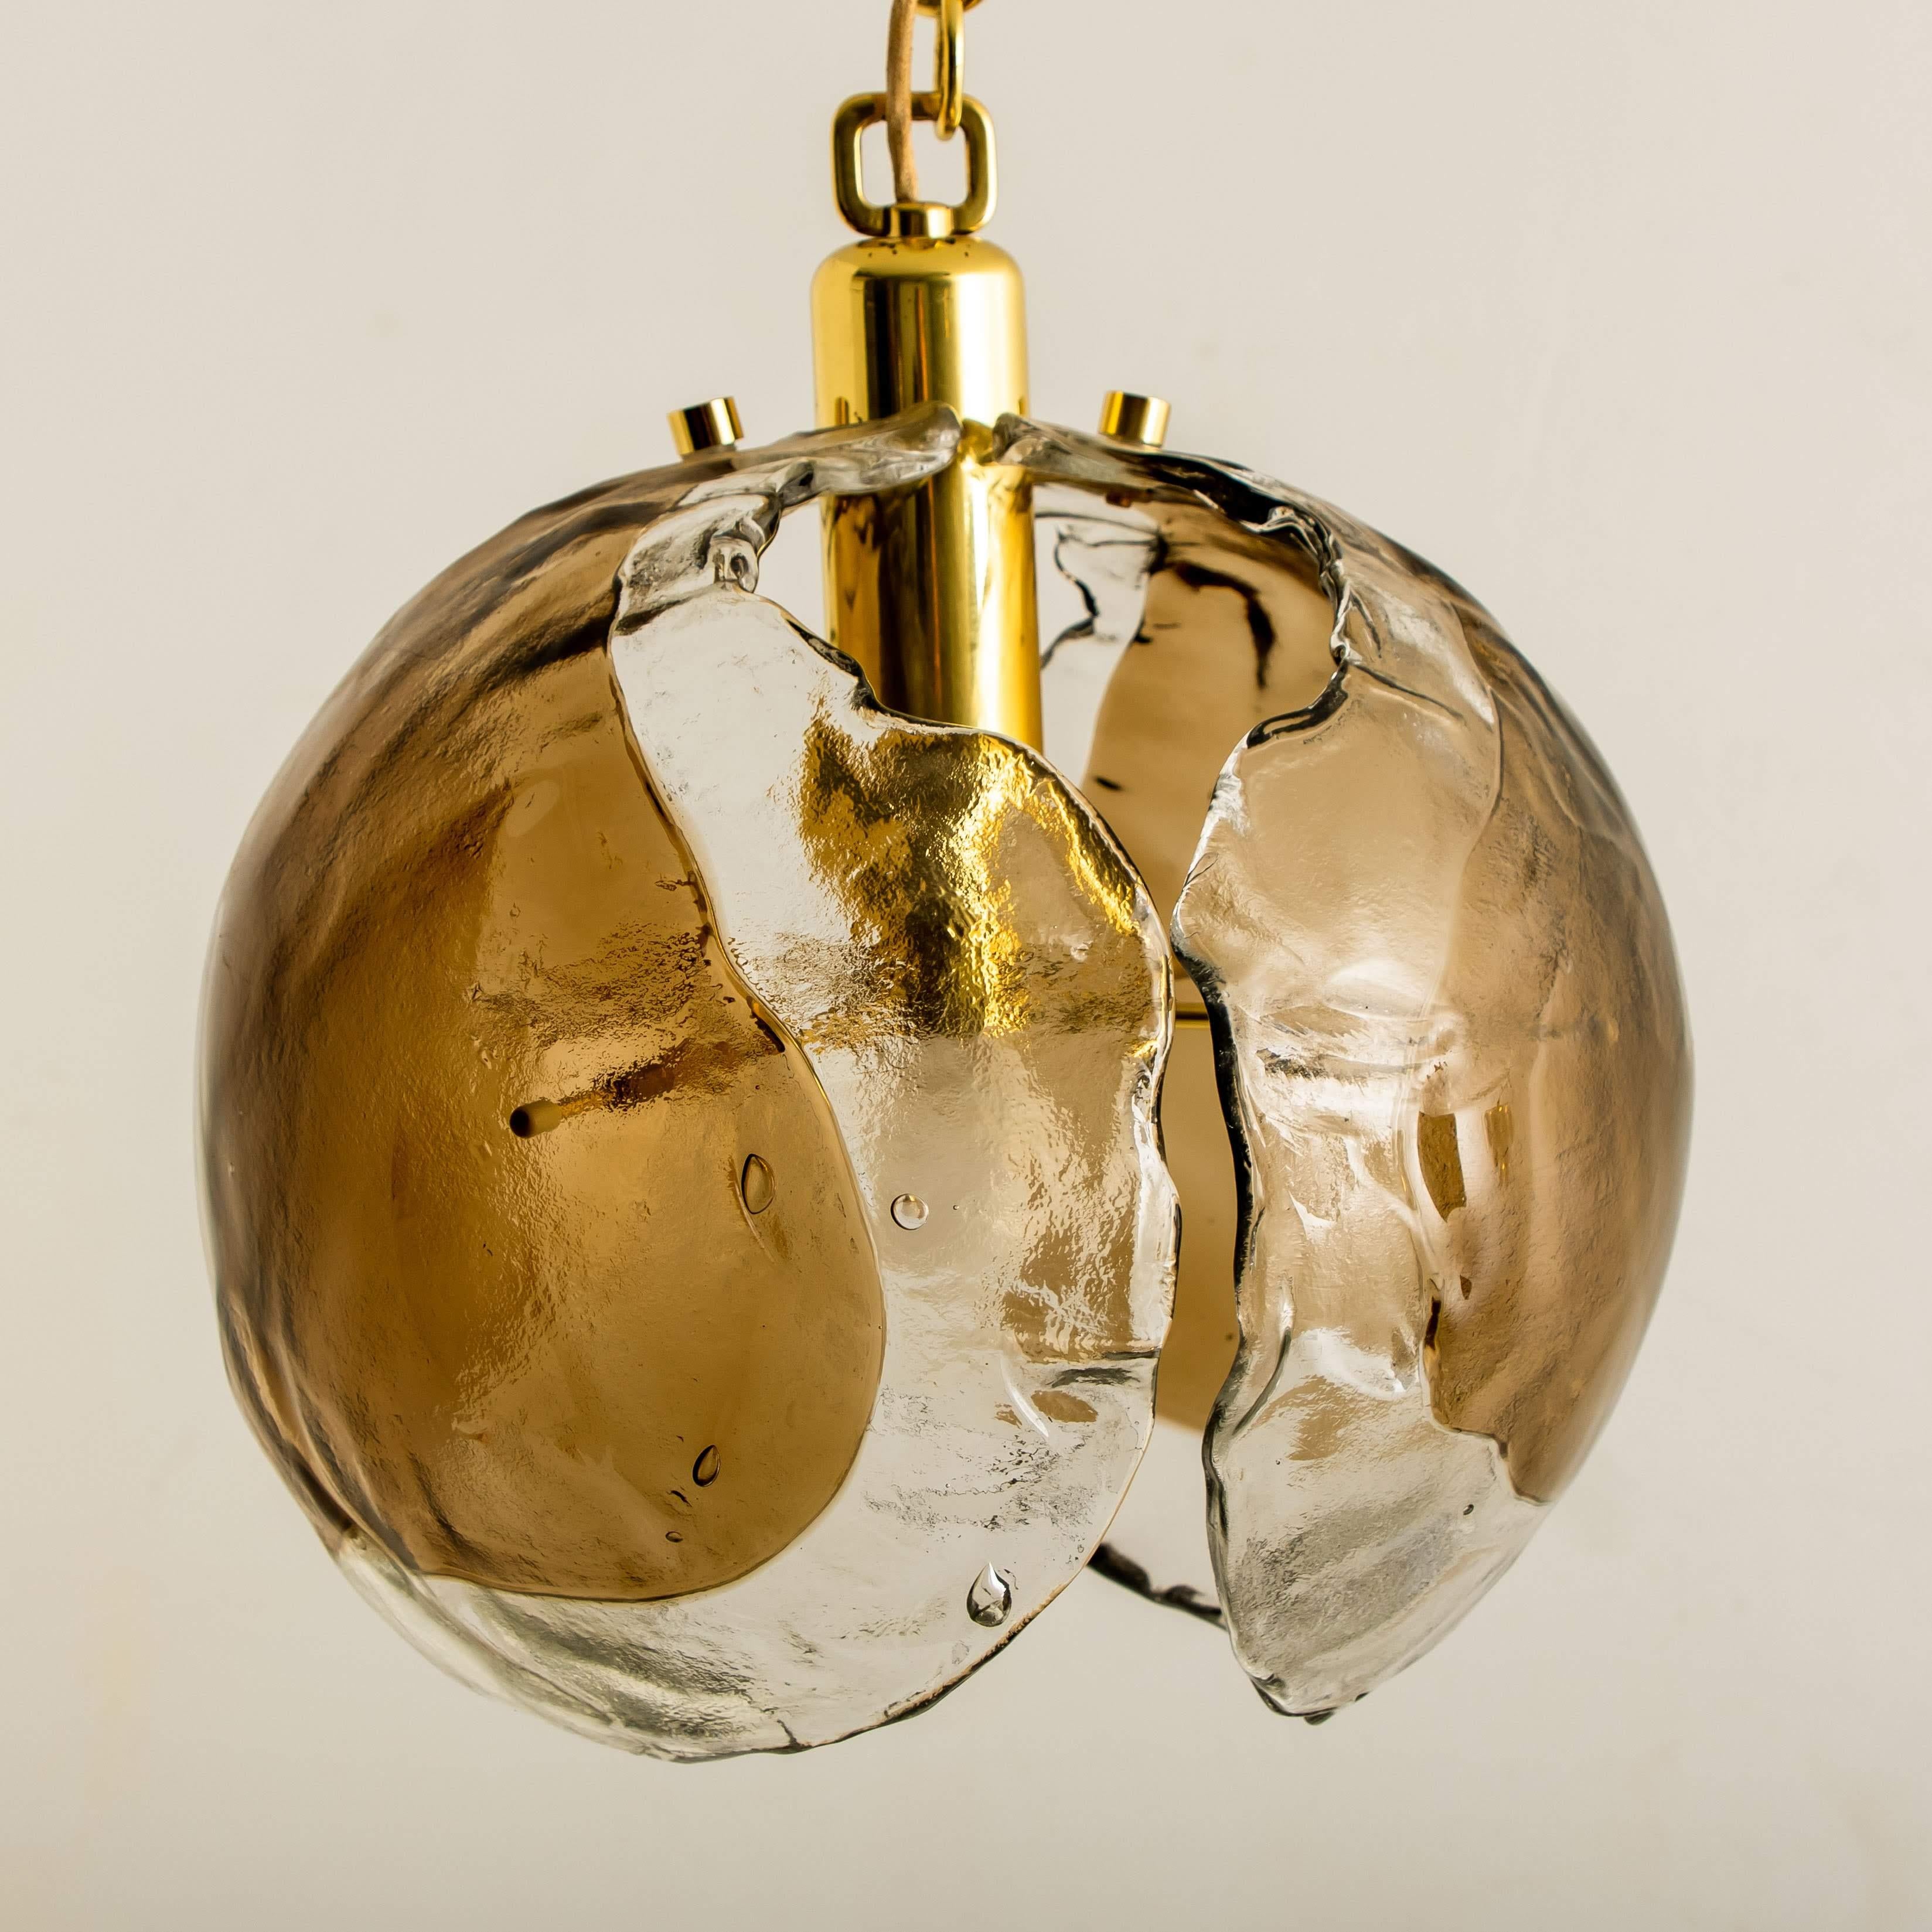 German 1 of the 3 Kalmar Chandelier Pendant Lights, Smoked Glass and Brass, 1970s For Sale